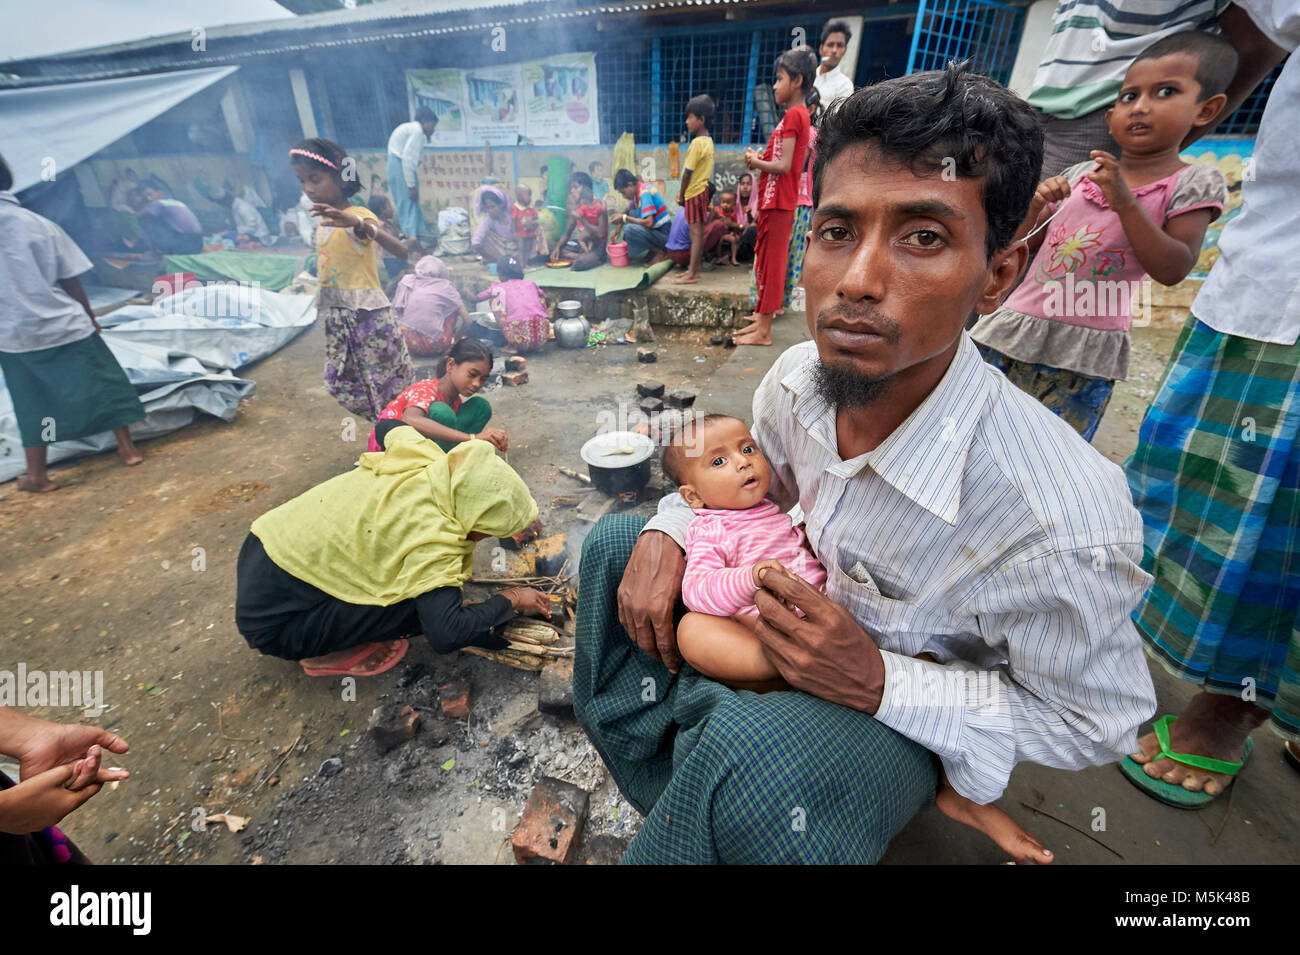 A Rohingya man who just crossed the border from Myanmar, waits with a child to complete registration in the Kutupalong Camp in Bangladesh. Stock Photo